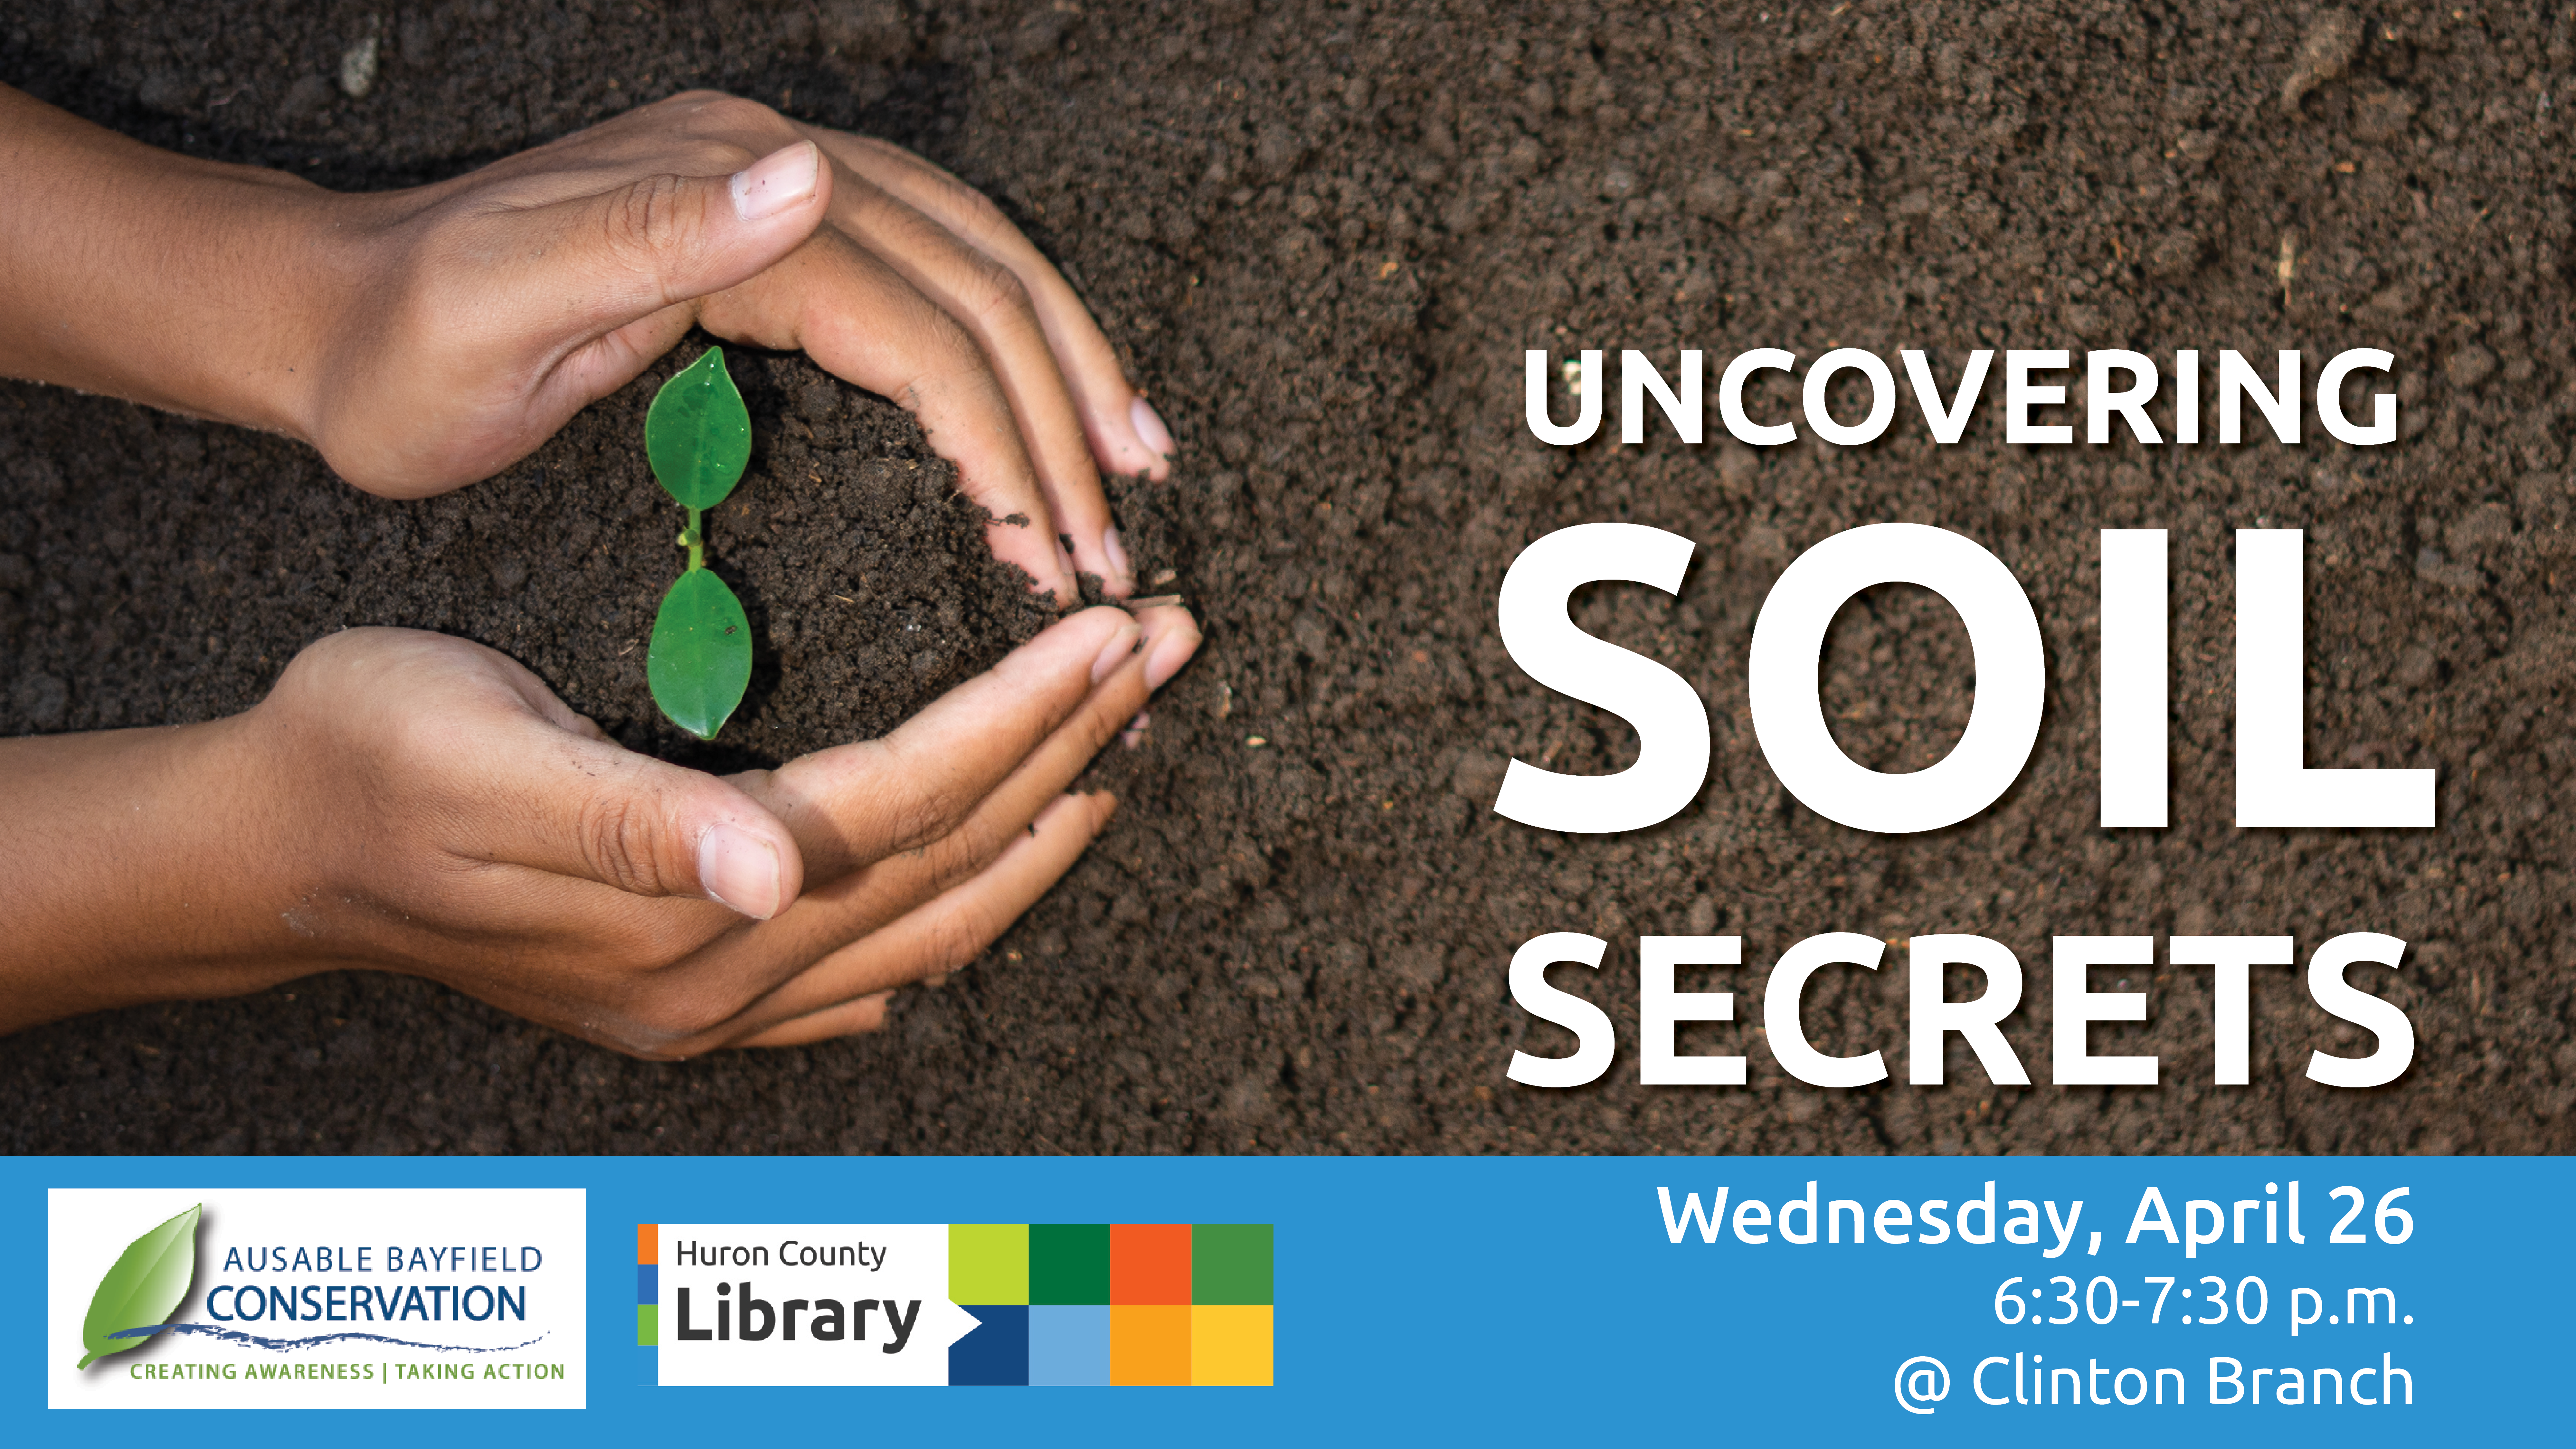 Image of soil with hands around a seedling. Text promoted uncovering soil secrets at Clinton Branch.